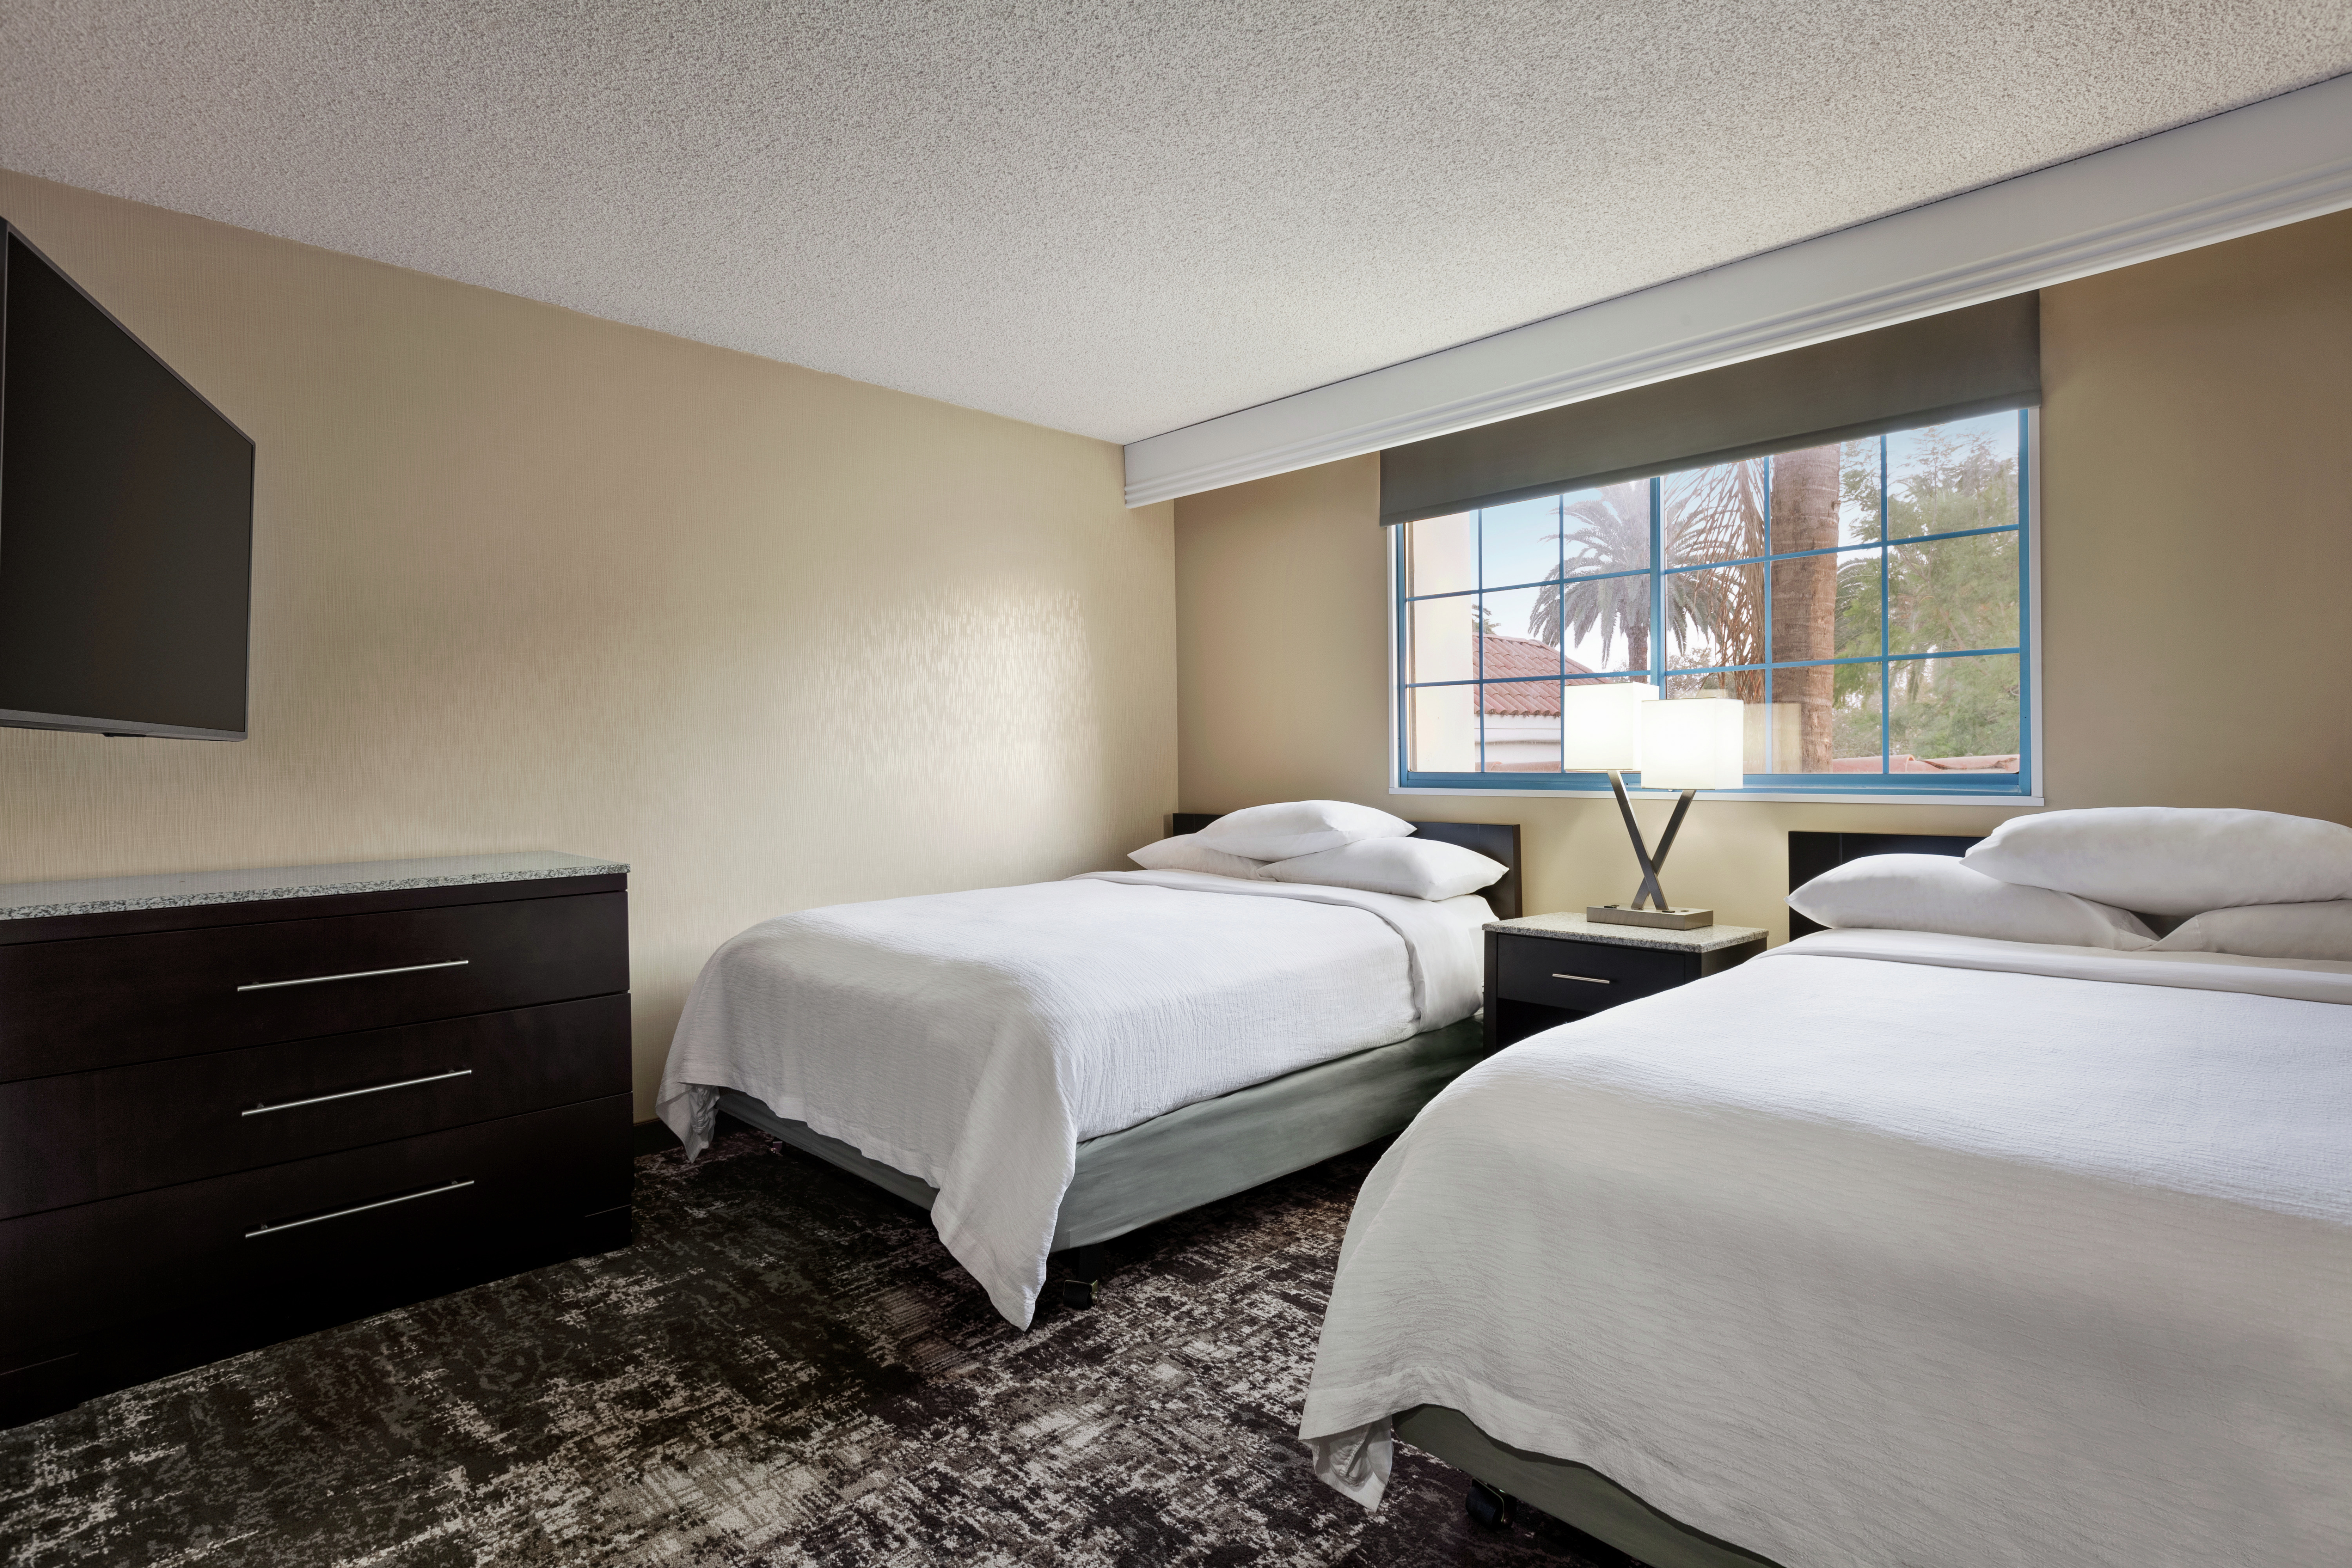 Accessible Guestroom with Two Queen Beds, Outside View, and Room Technology